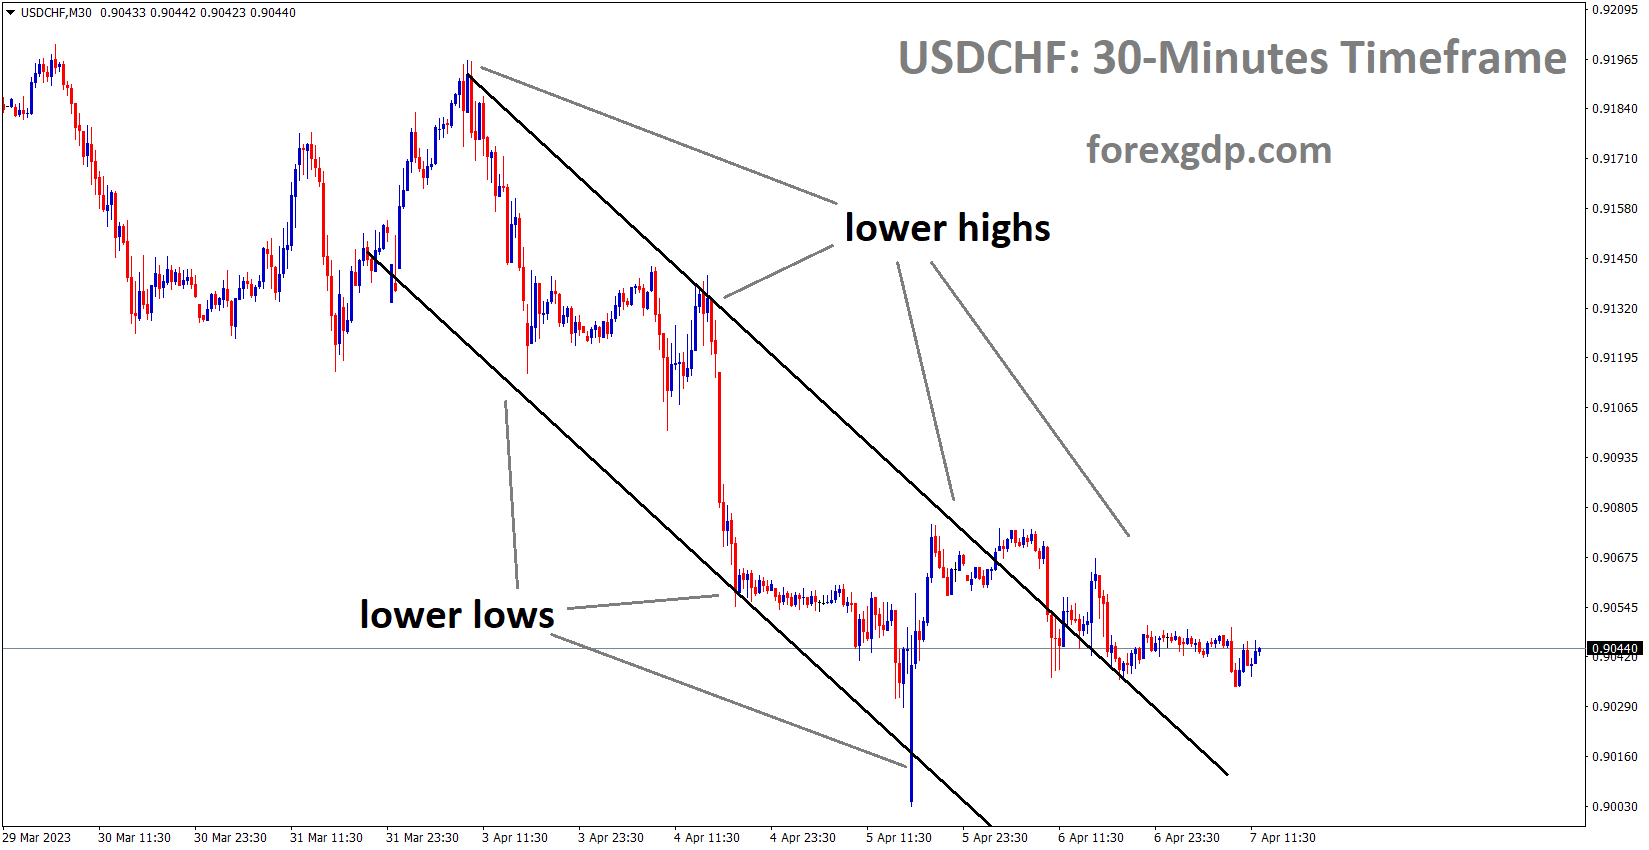 USDCHF is moving in the Descending channel and the market has reached the lower high area of the channel 1